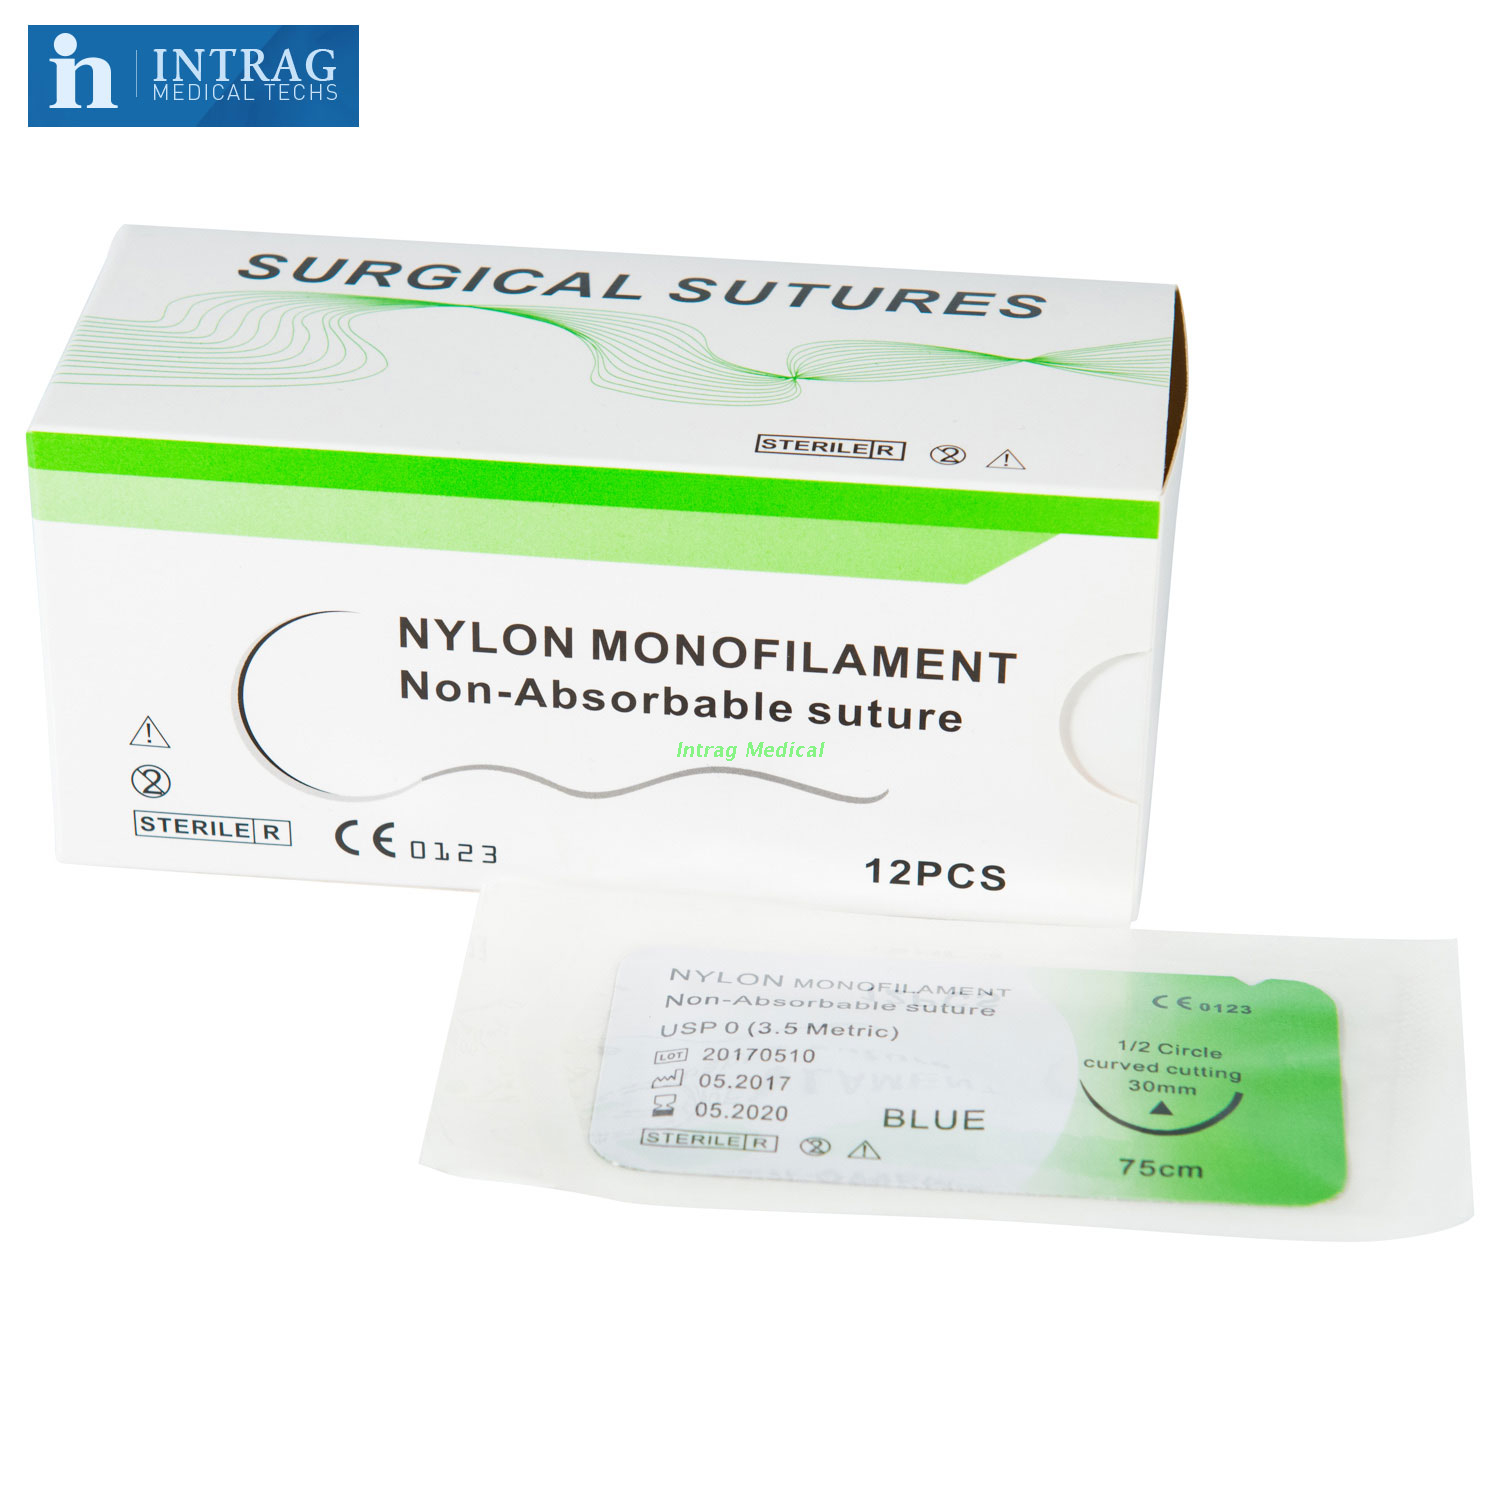 Nylon (Non-Absorbable) Suture - Buy Product on Shanghai Intrag Medical ...